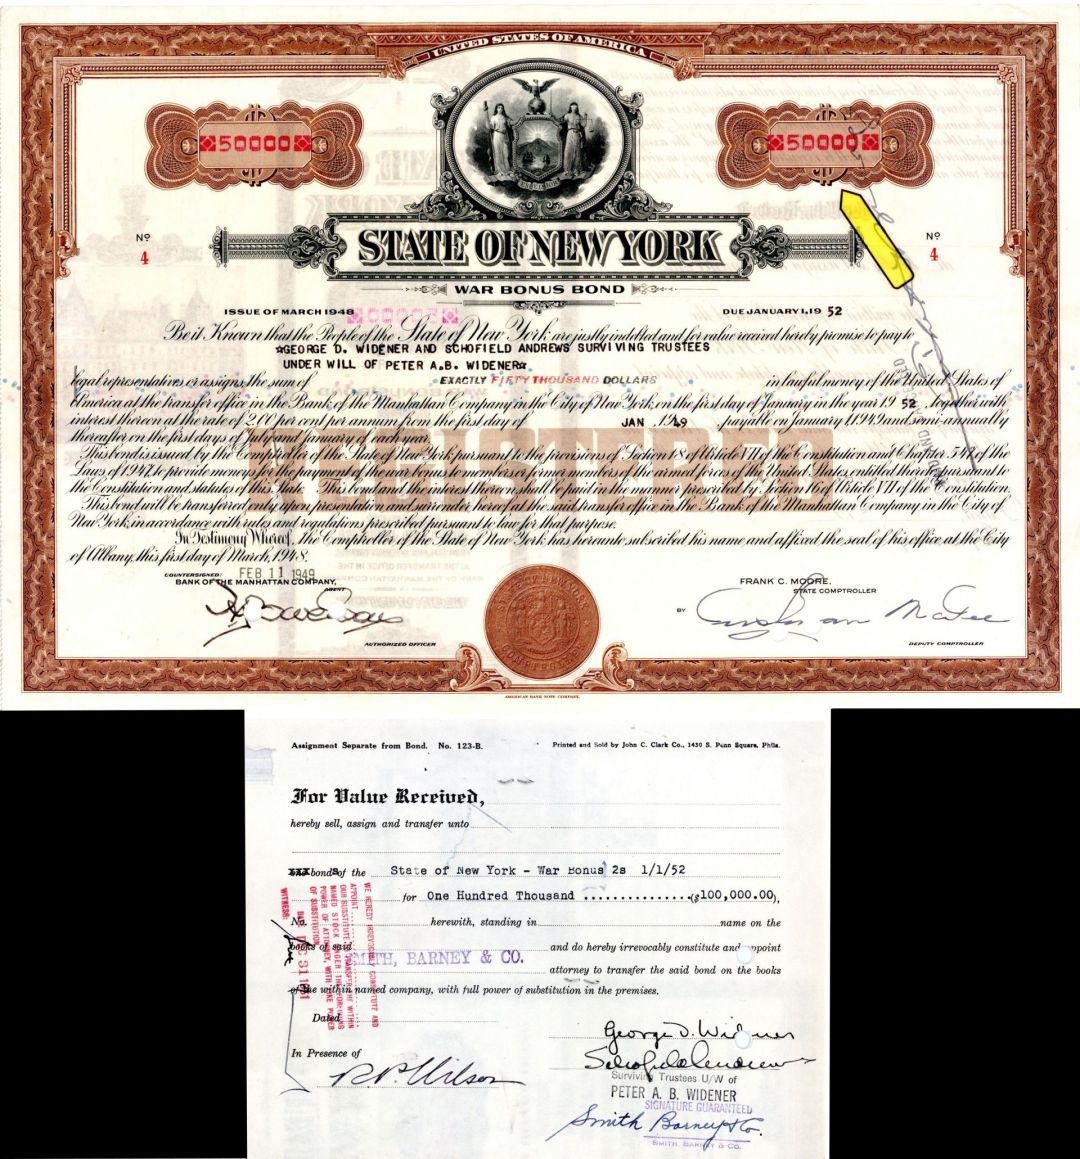 State of New York - 1949 dated $50,000 War Bonus Bond Signed by Son of George D. Widener